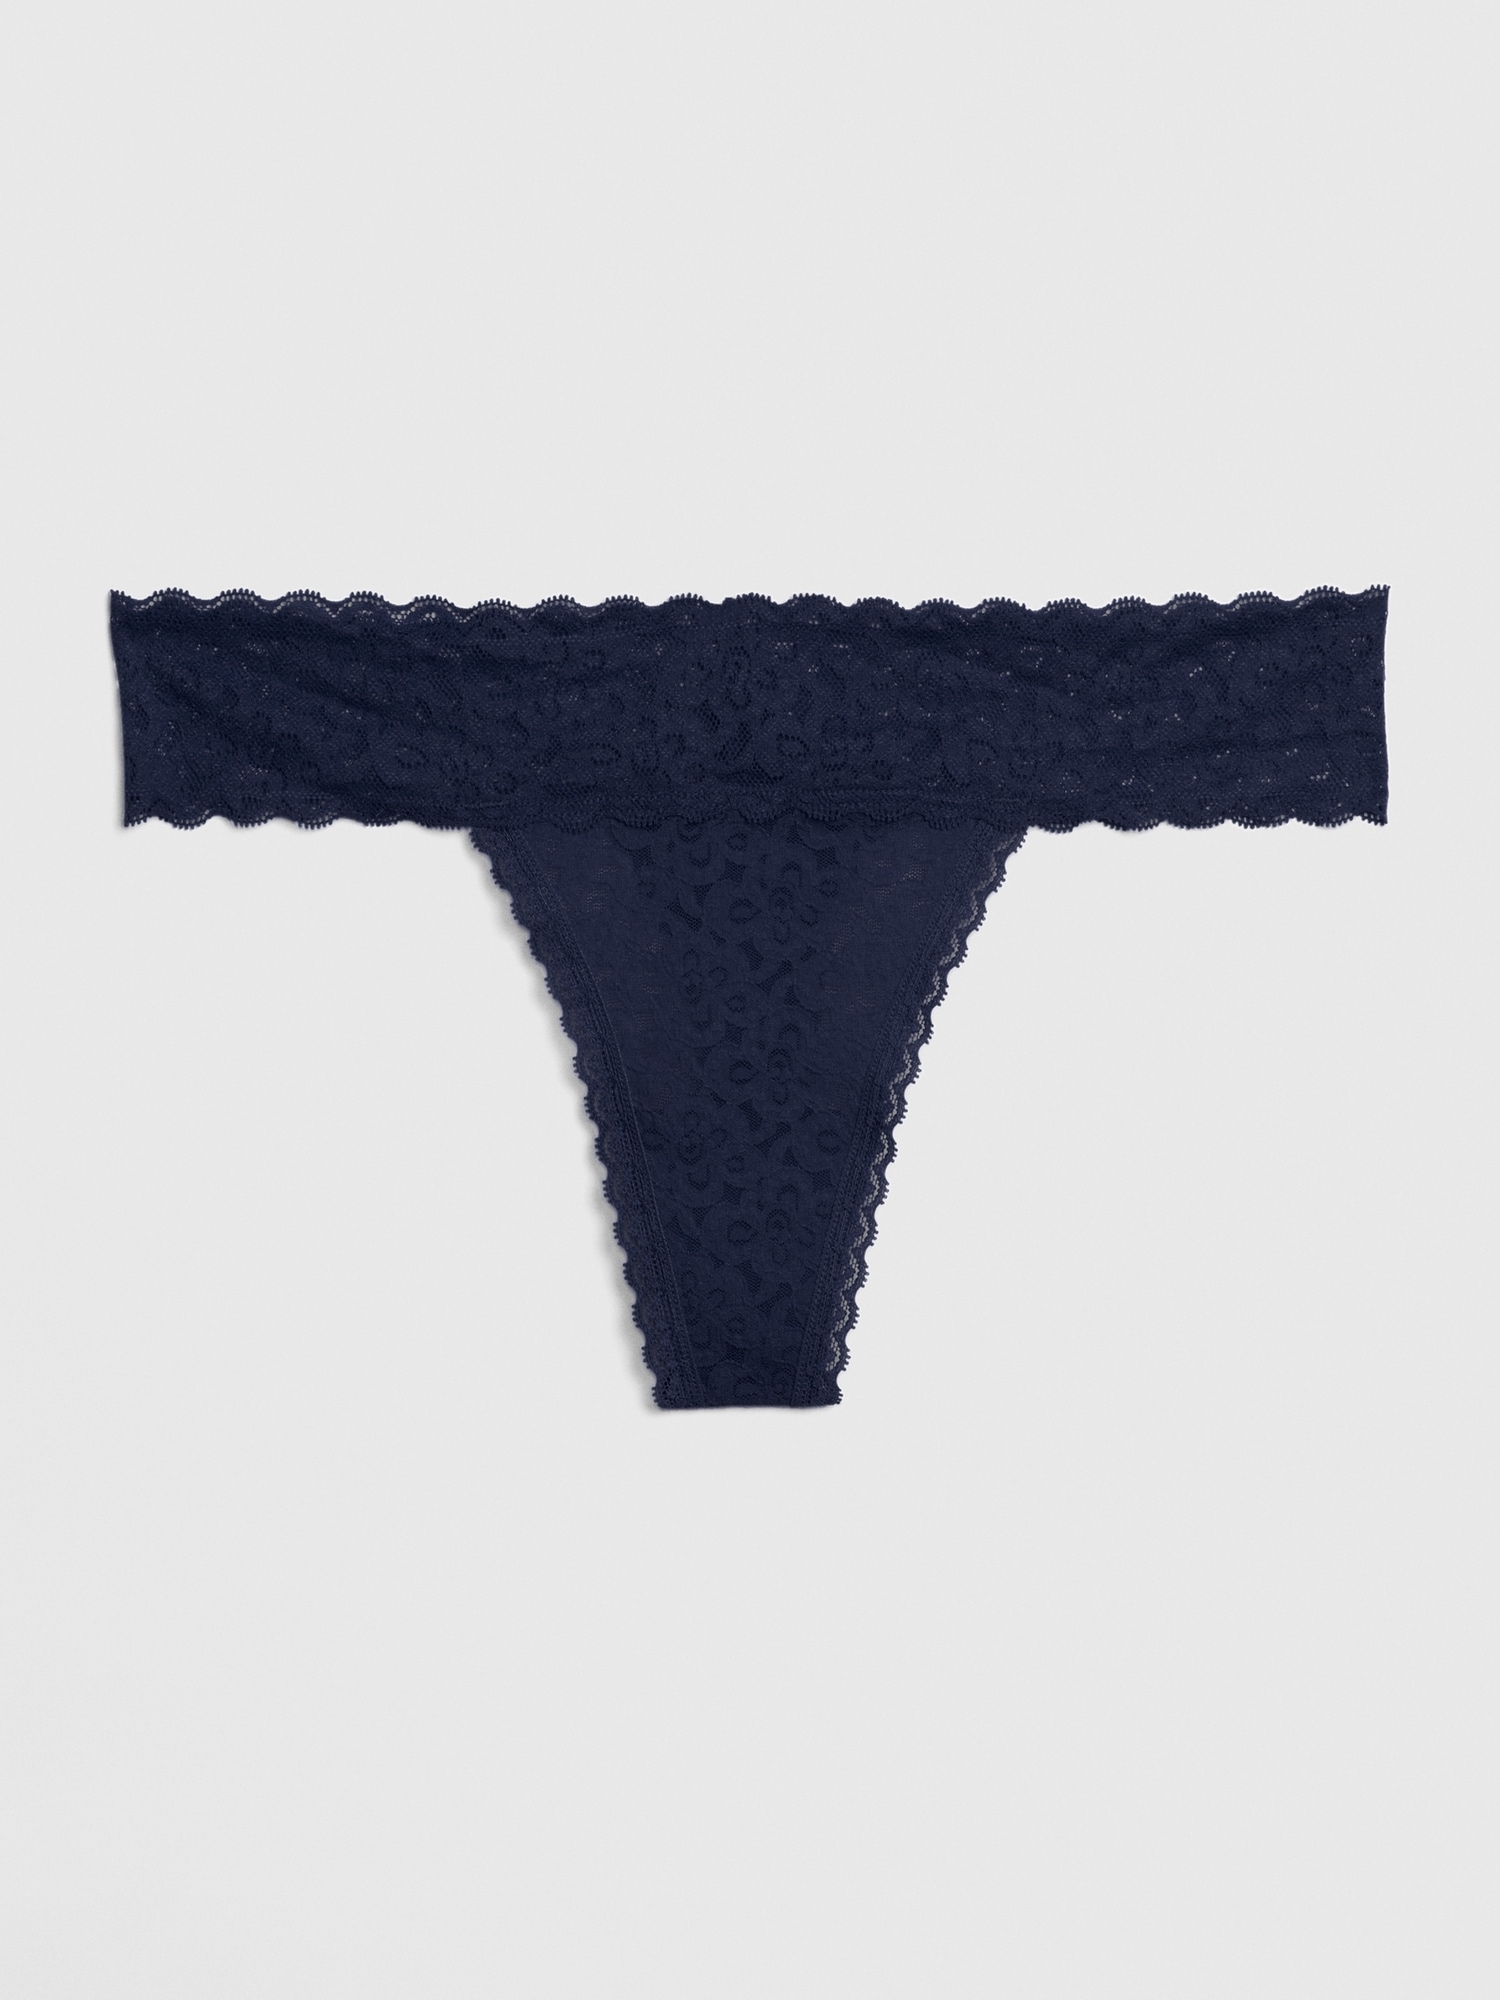 Gap Women's Underwear (Select Sizes): ​3-Pack Lace Thong